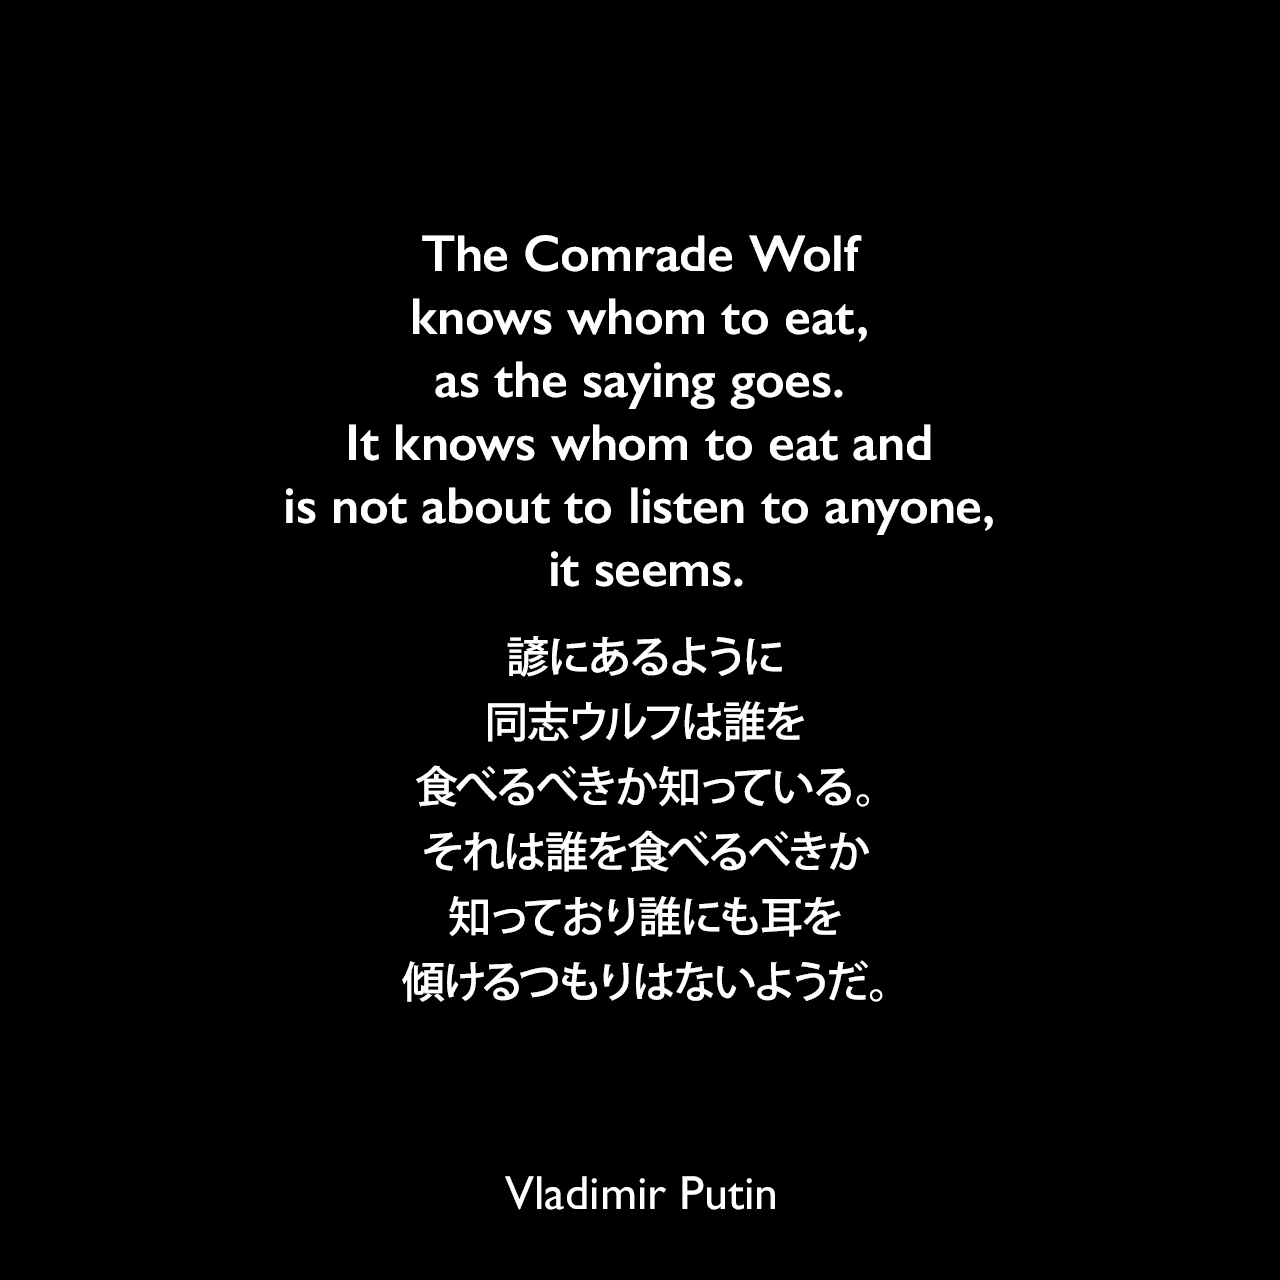 The Comrade Wolf knows whom to eat, as the saying goes. It knows whom to eat and is not about to listen to anyone, it seems.諺にあるように、同志ウルフは誰を食べるべきか知っている。それは誰を食べるべきか知っており誰にも耳を傾けるつもりはないようだ。Vladimir Putin